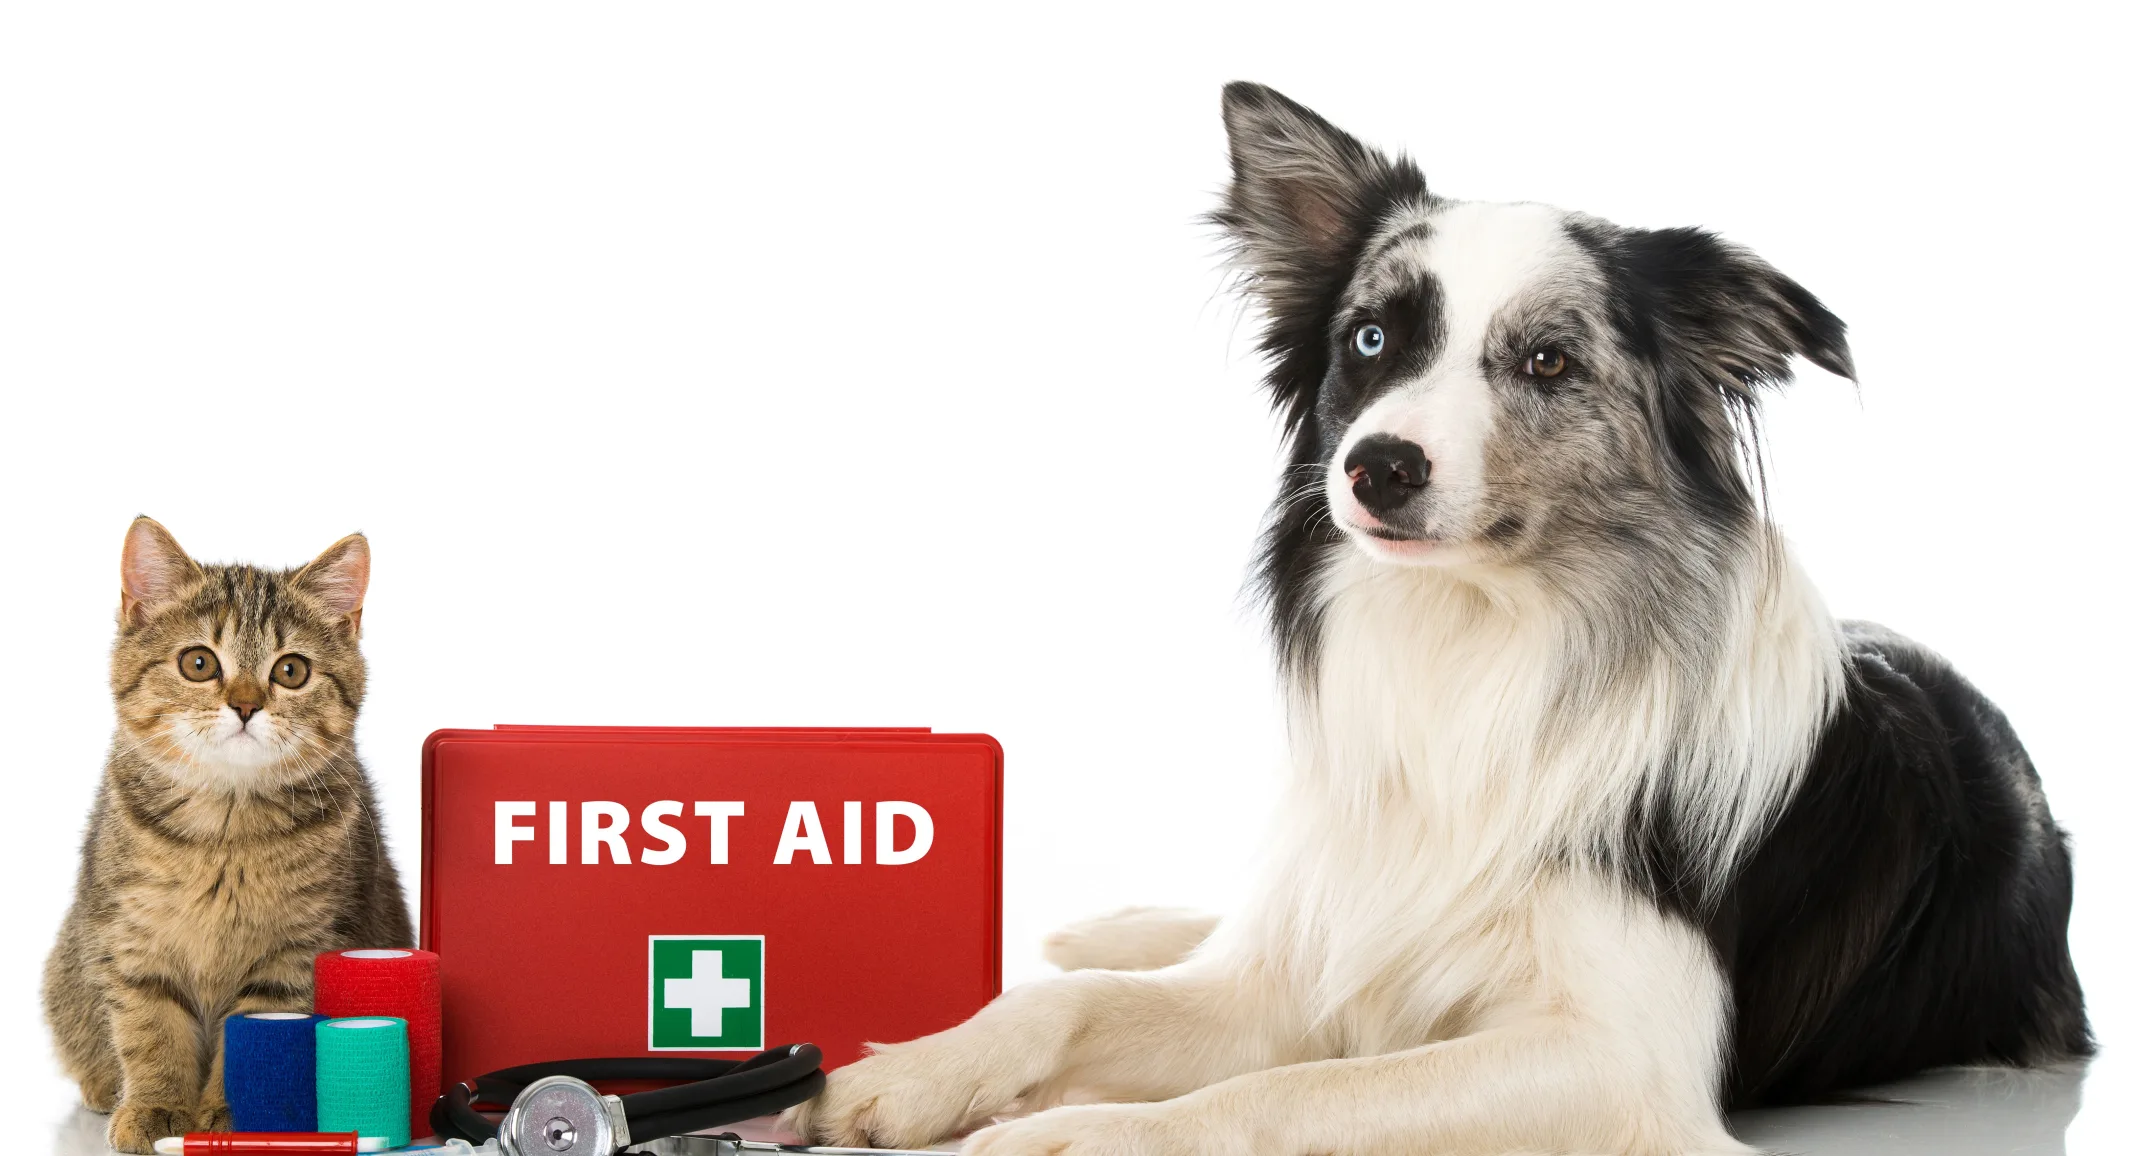 cat and dog sitting next to first aid kit